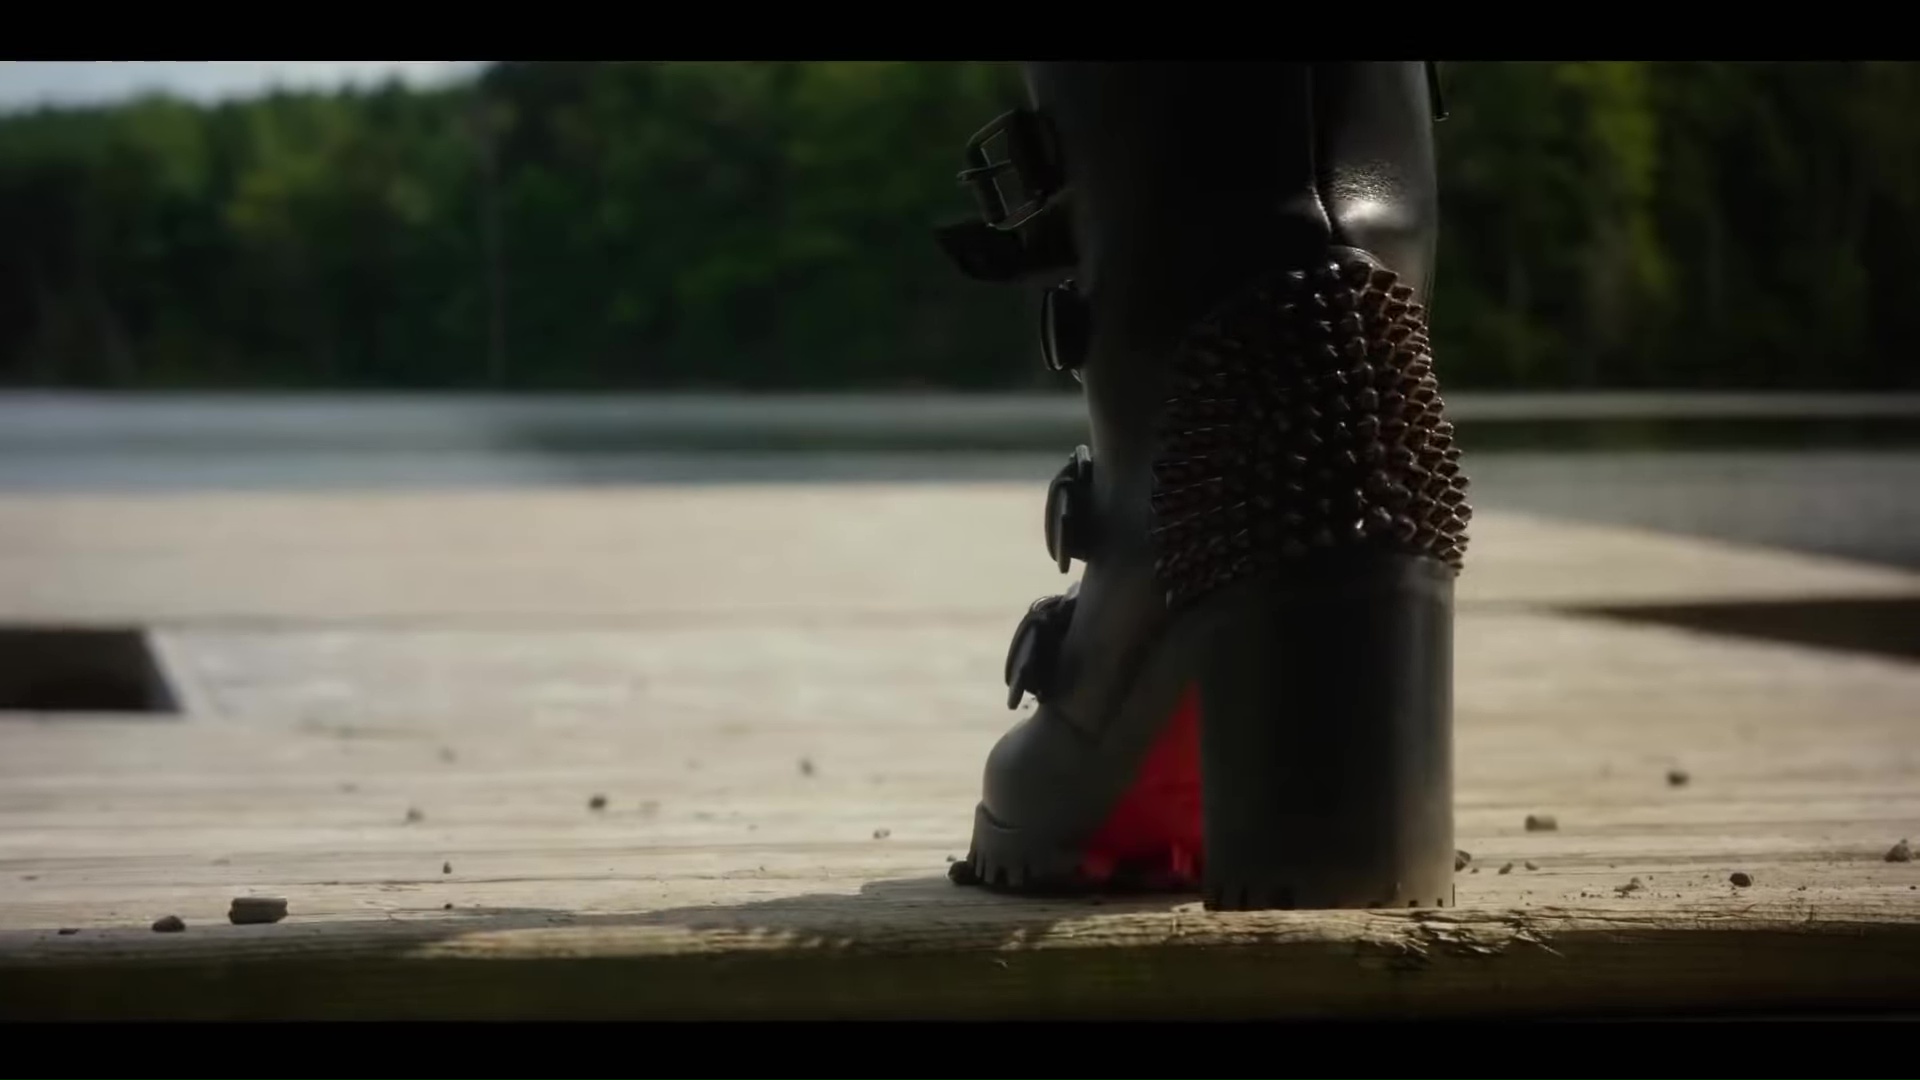 Christian Louboutin Studded Buckle Boots Worn by Blake Lively in A Simple Favor (2018 ...1920 x 1080